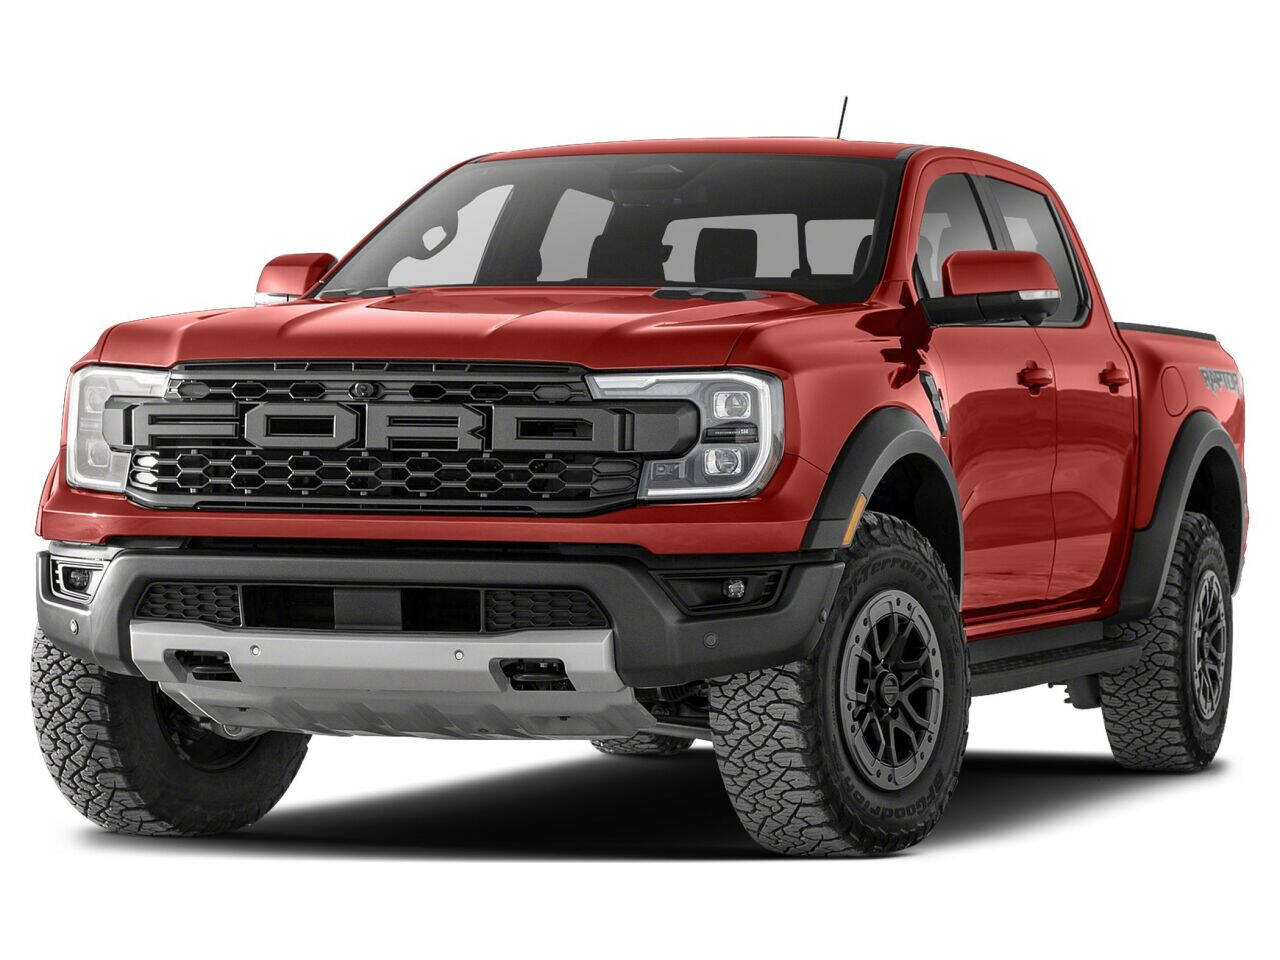 New Ford Ranger For Sale In Lincoln, IL - ®